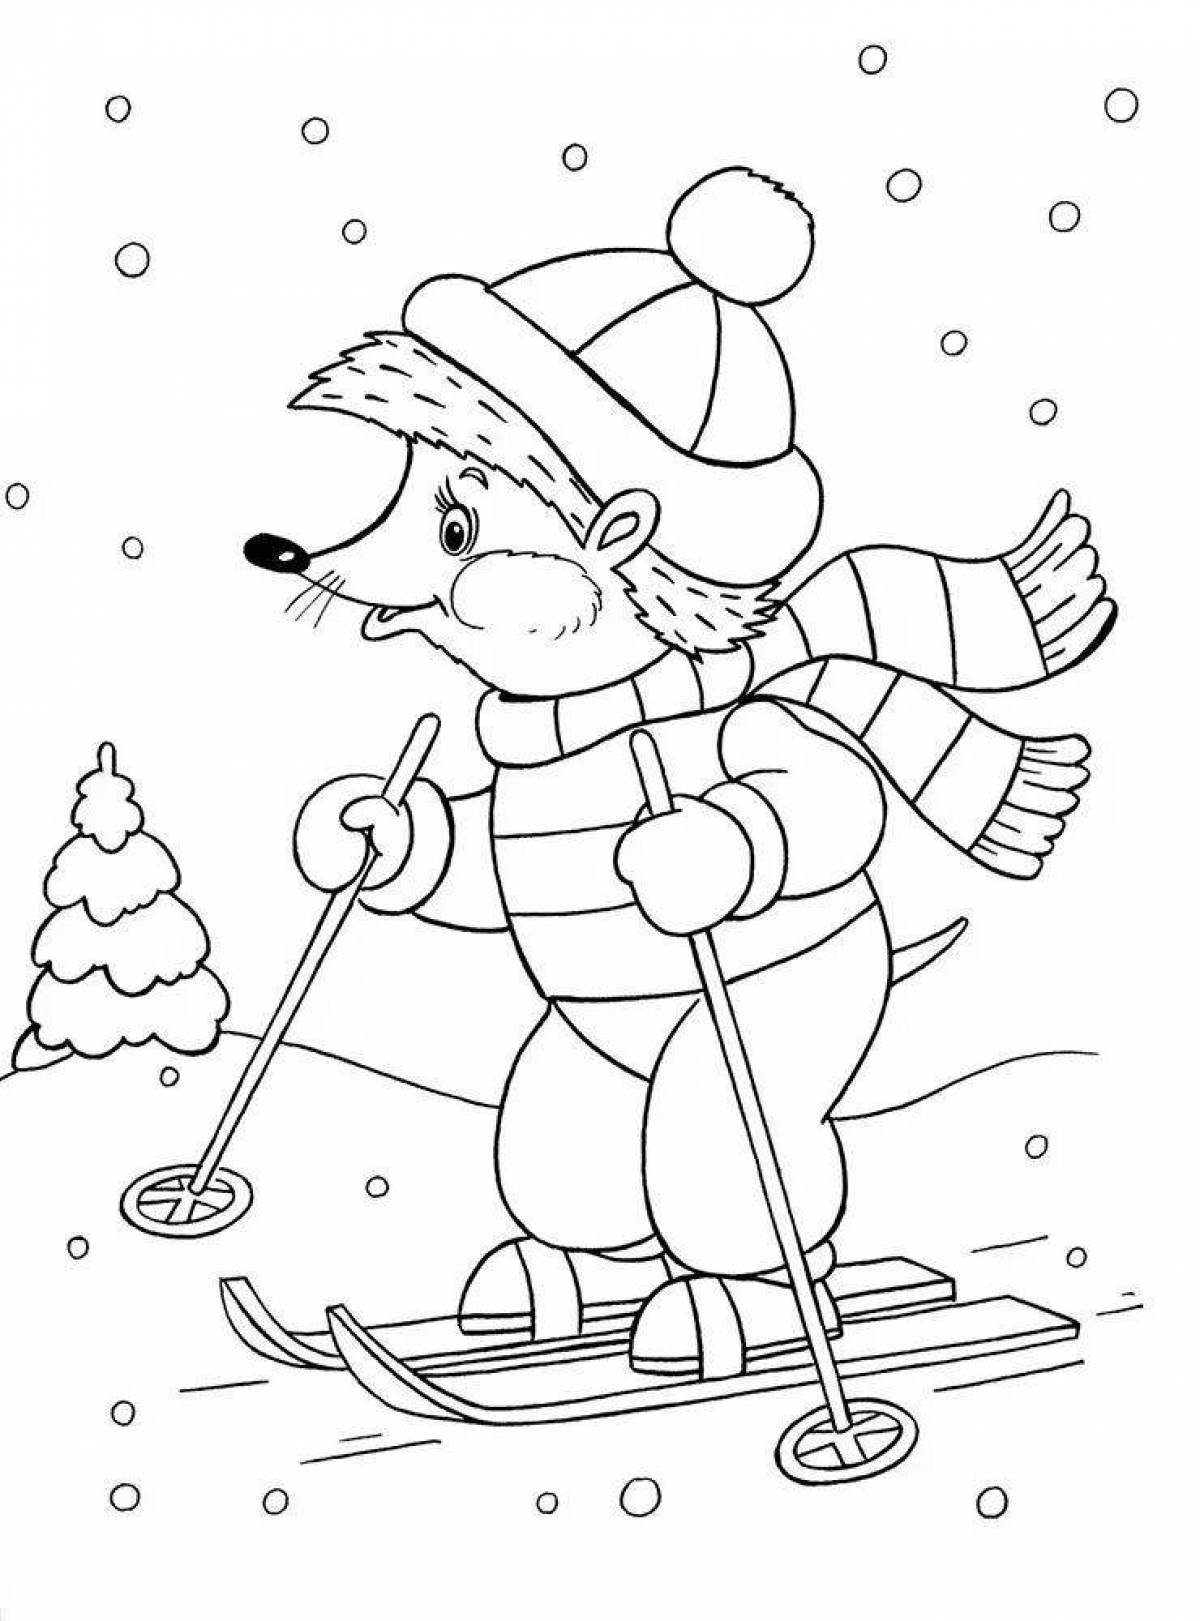 Playful children's winter coloring book